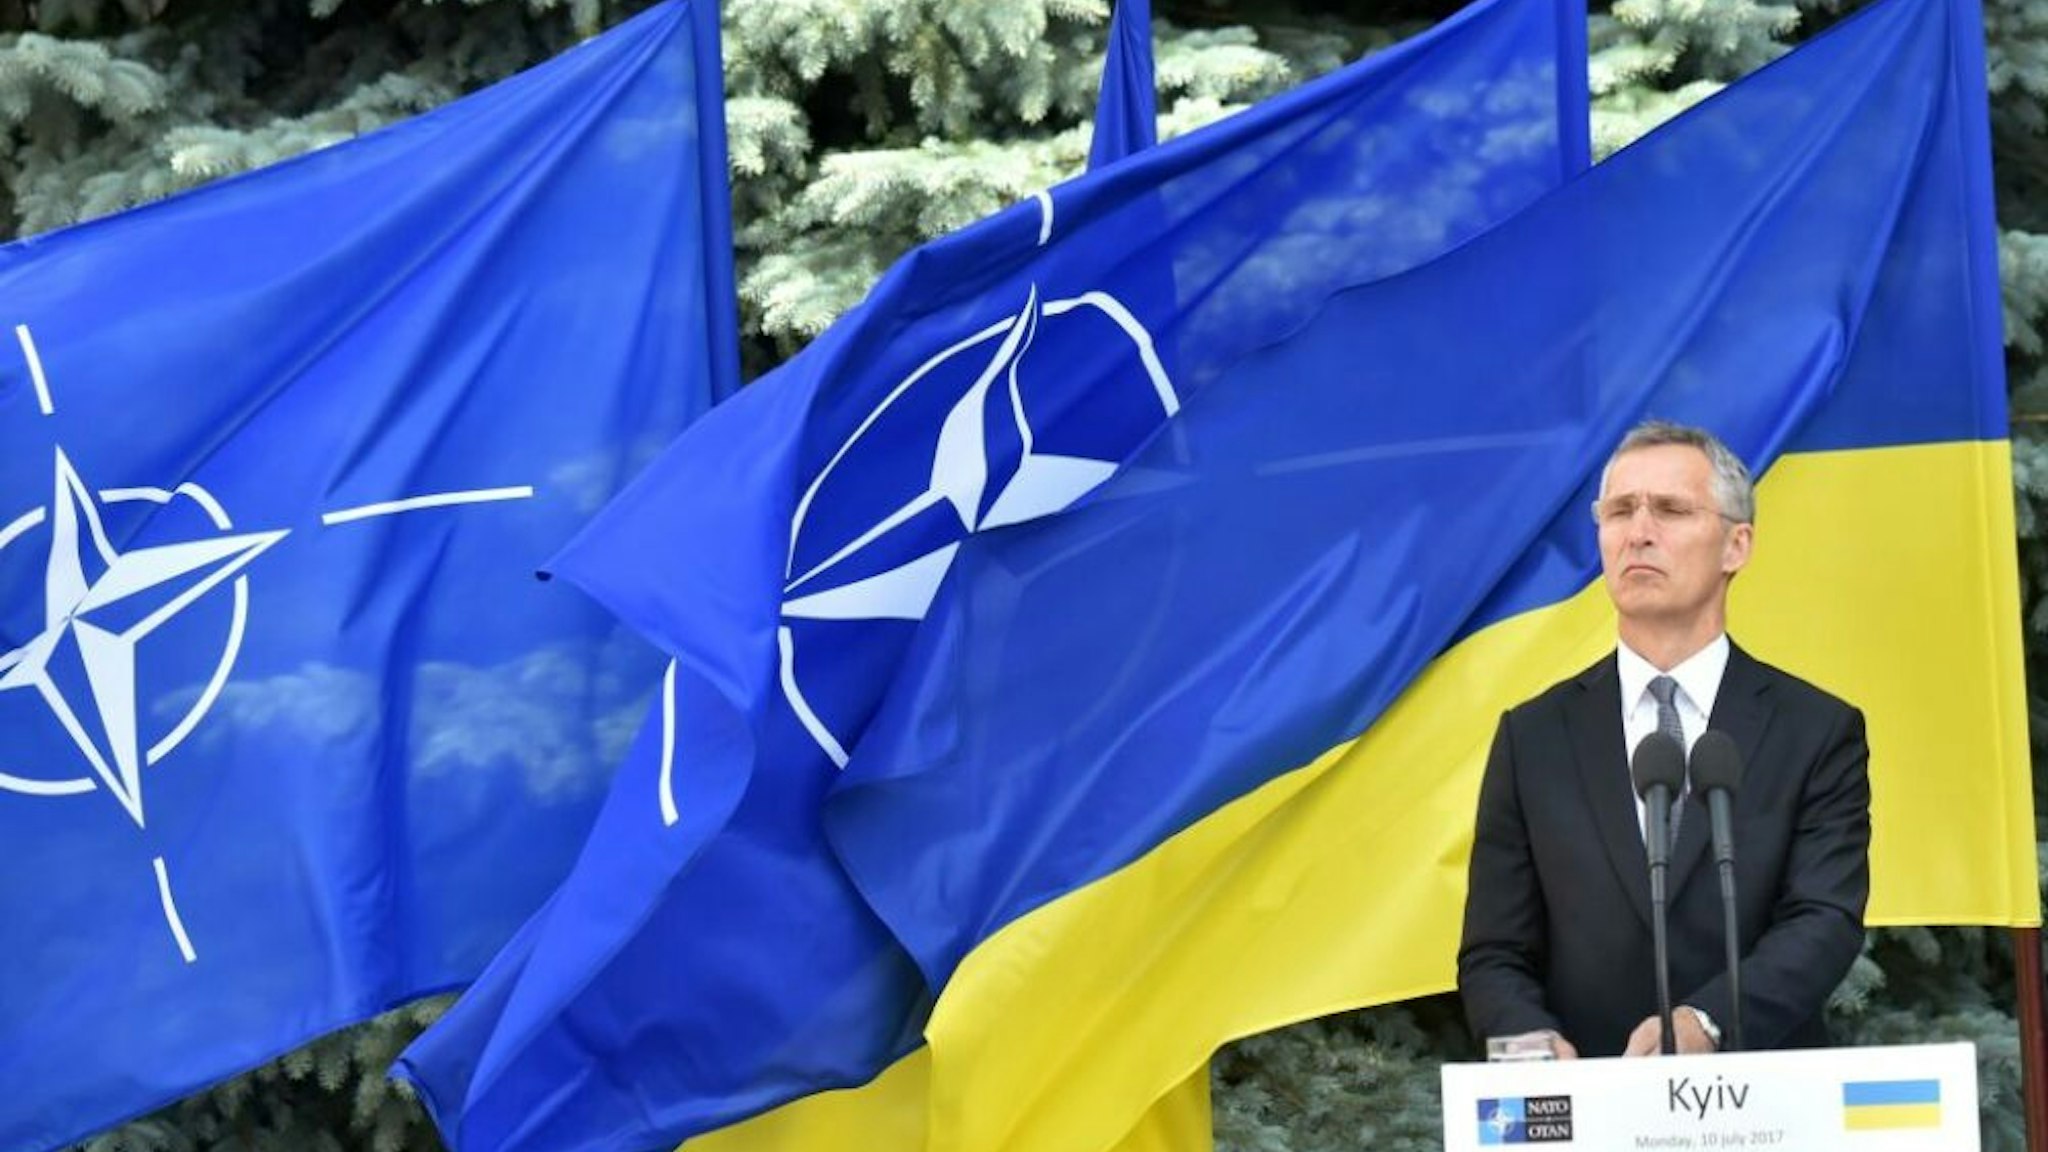 NATO Secretary General Jens Stoltenberg stands during a press conference with Ukrainian President in Kiev on July 10, 2017. ?NATO chief Jens Stoltenberg pledged the alliance's support for Ukraine as it faces a bloody insurgency by pro-Russian separatists in its eastern regions.